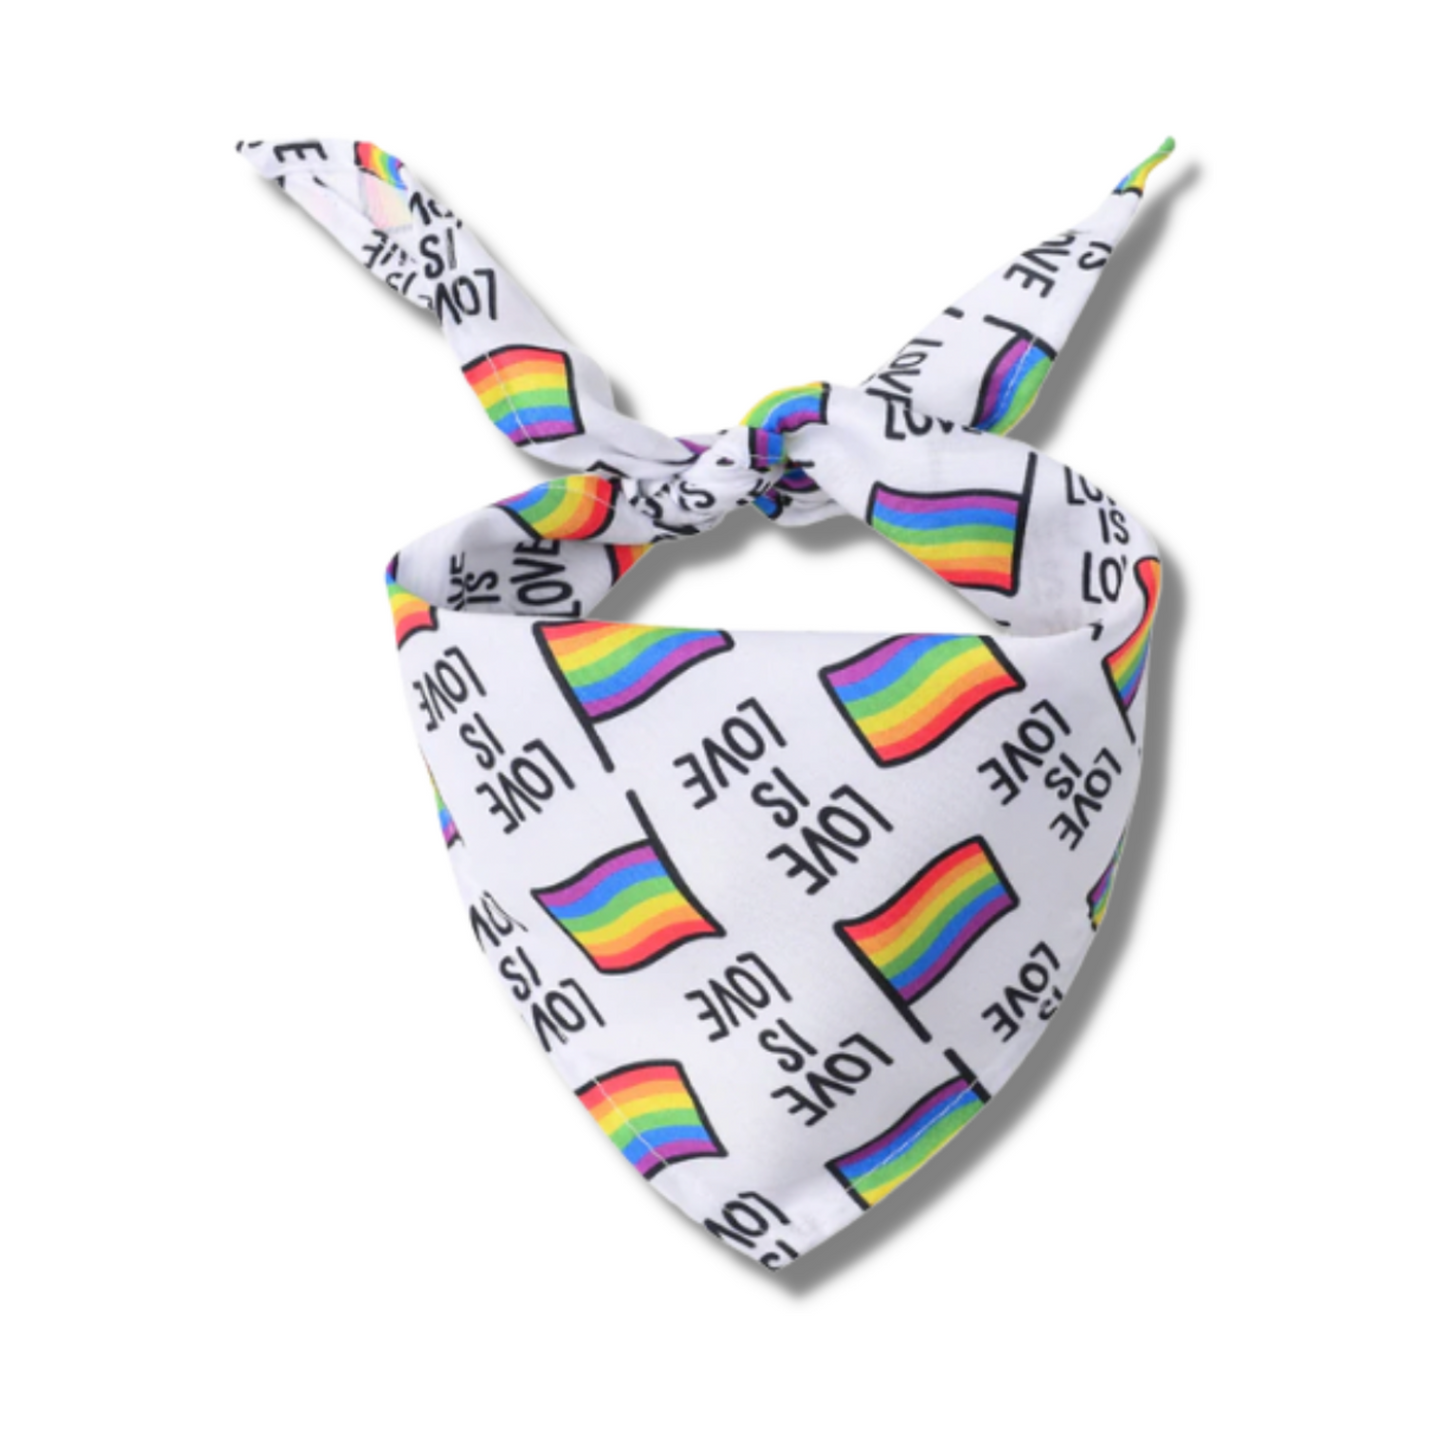 Love is love tie-up dog bandana fashion dog accessory, let's pawty 